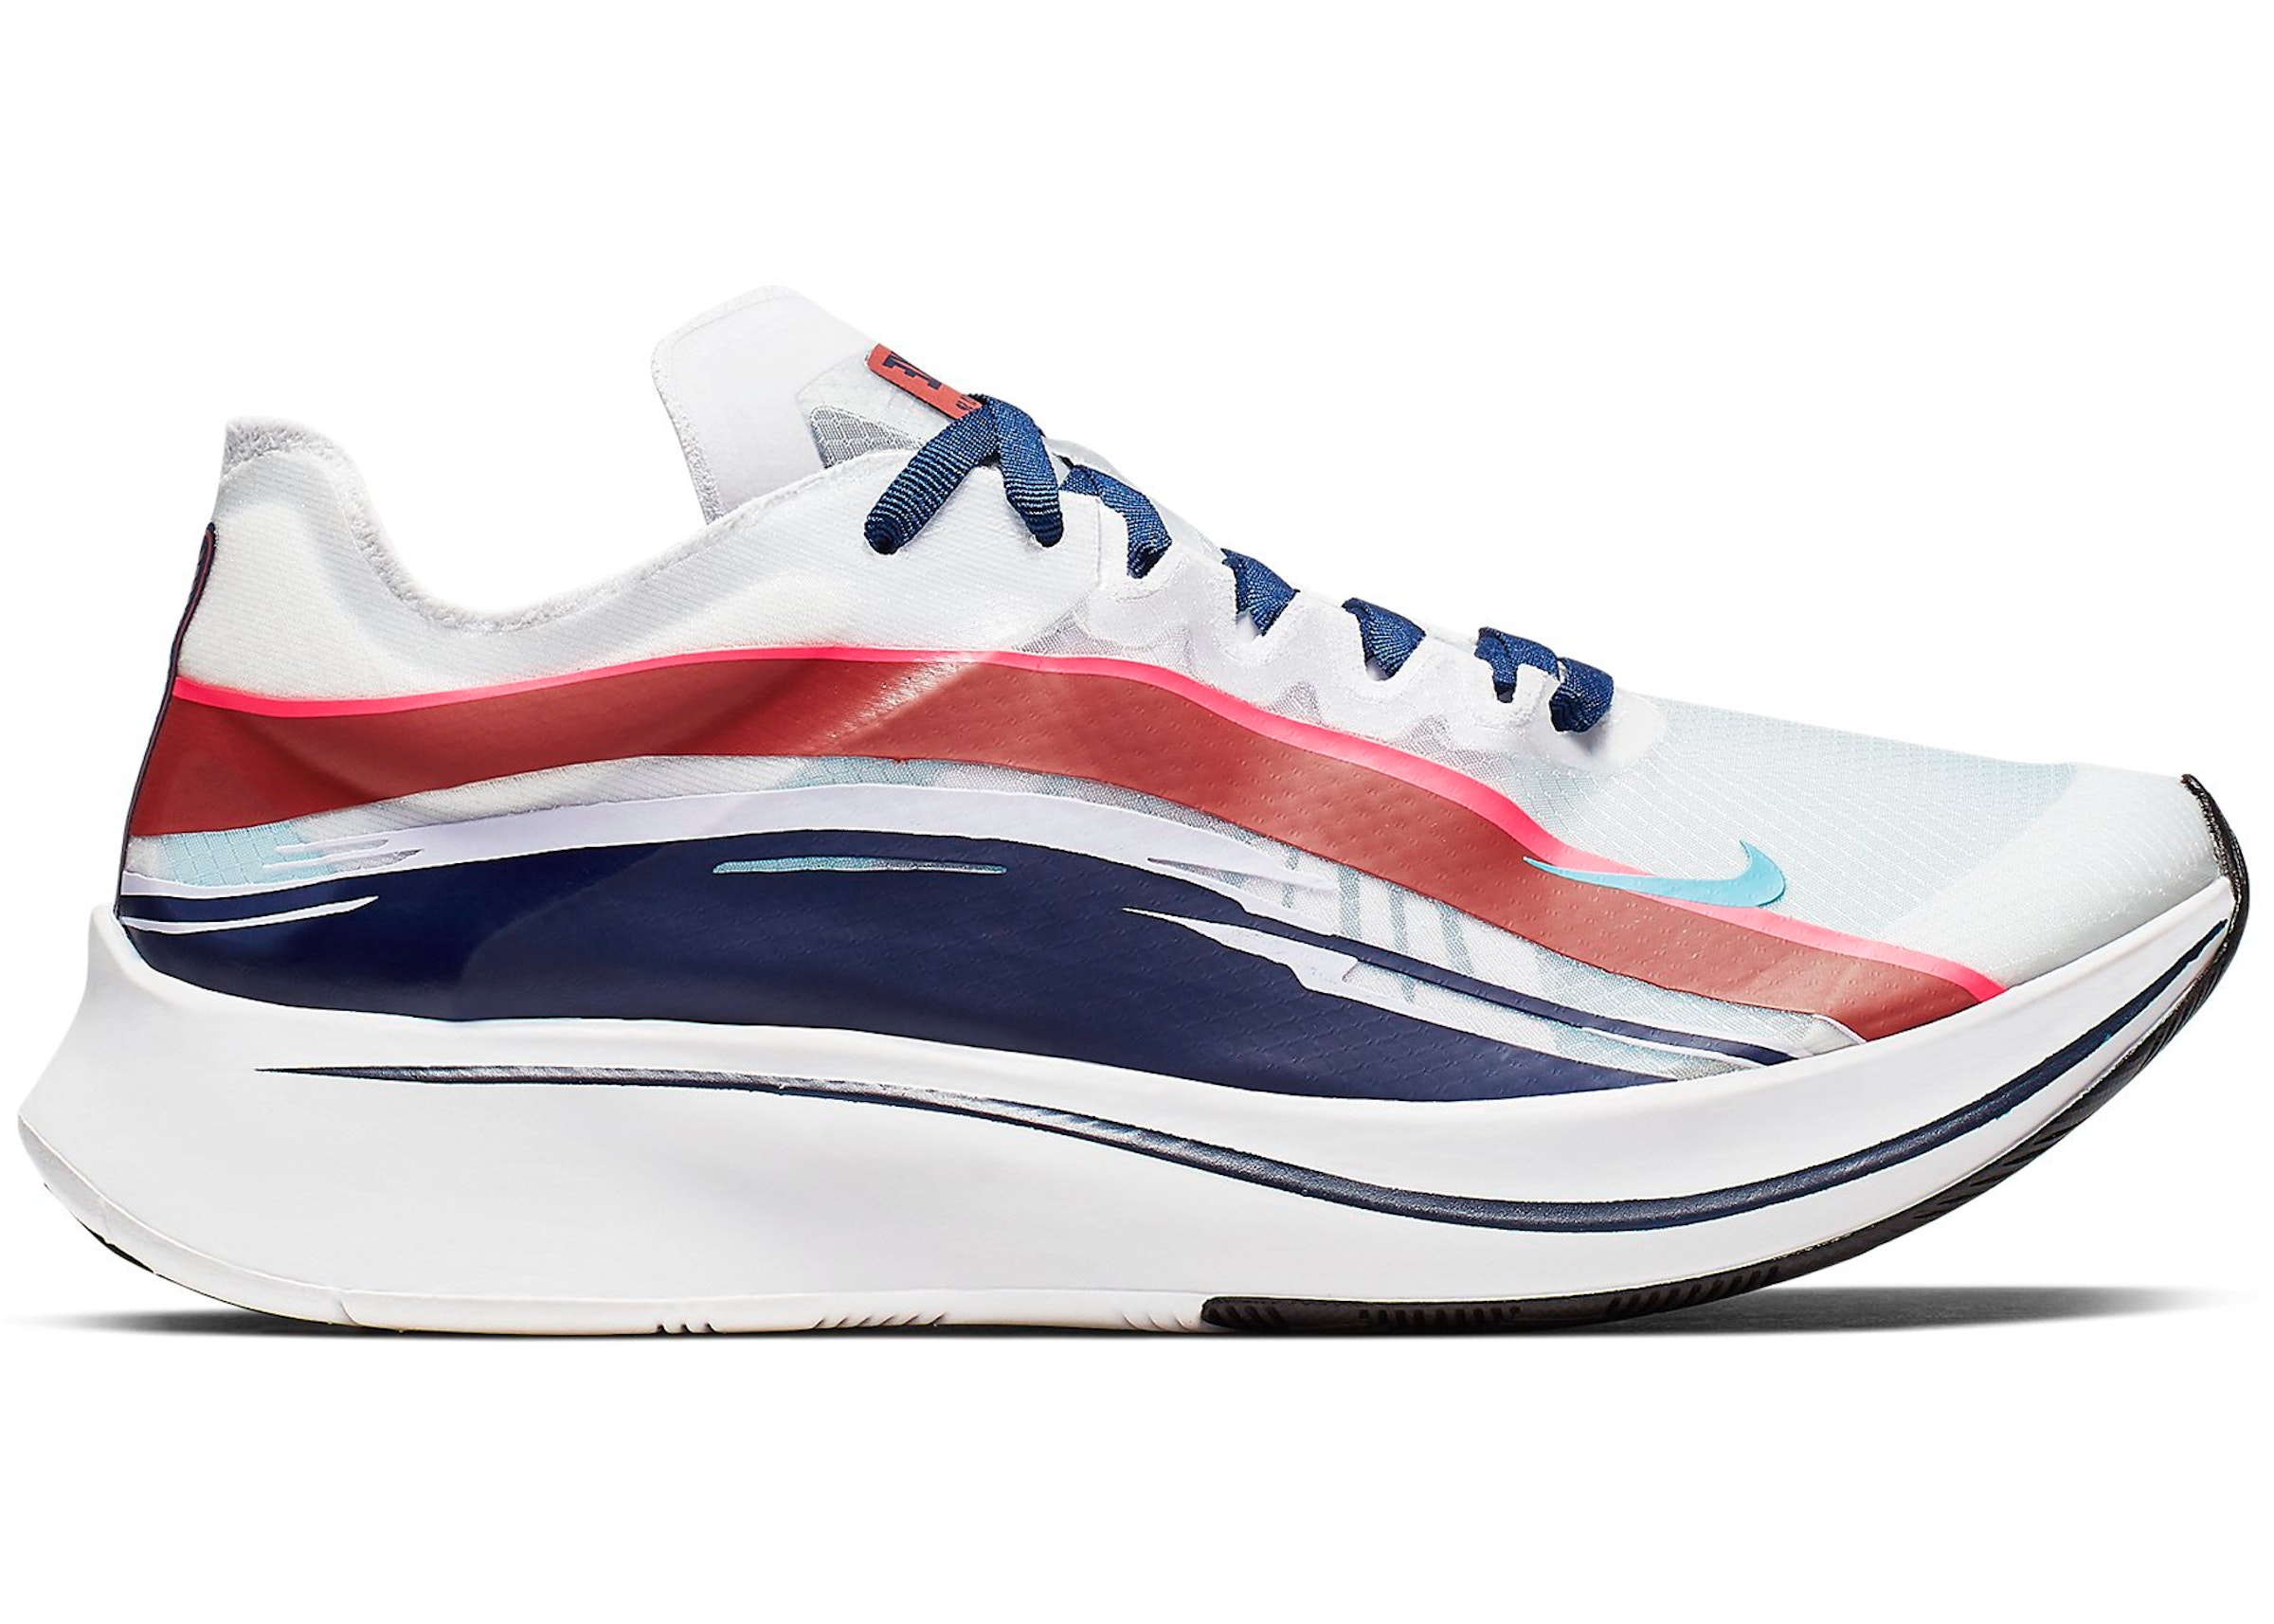 Pa Celsius Beenmerg Nike Zoom Fly SP AS Graphic Streaks (Women's) - BQ7940-140 - US